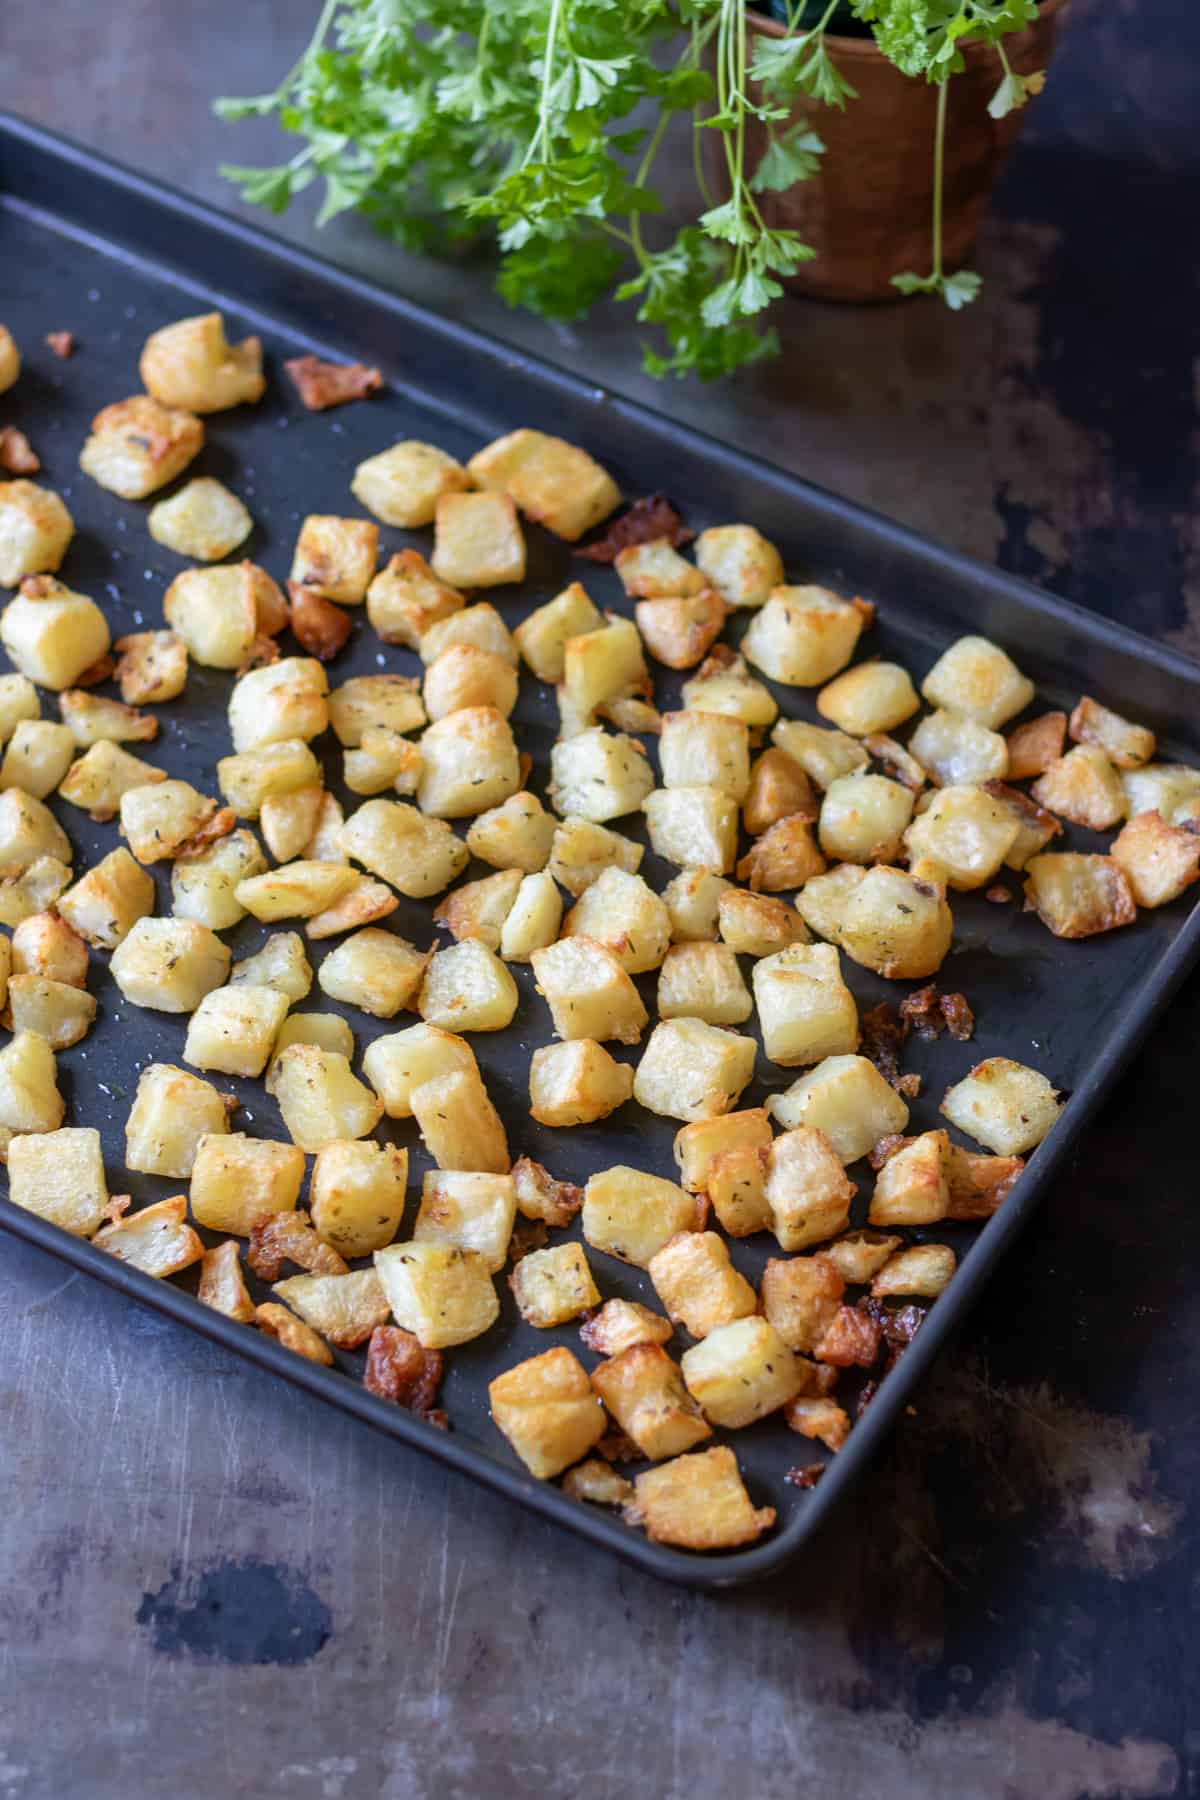 Roasted parmentier potatoes on a baking sheet.